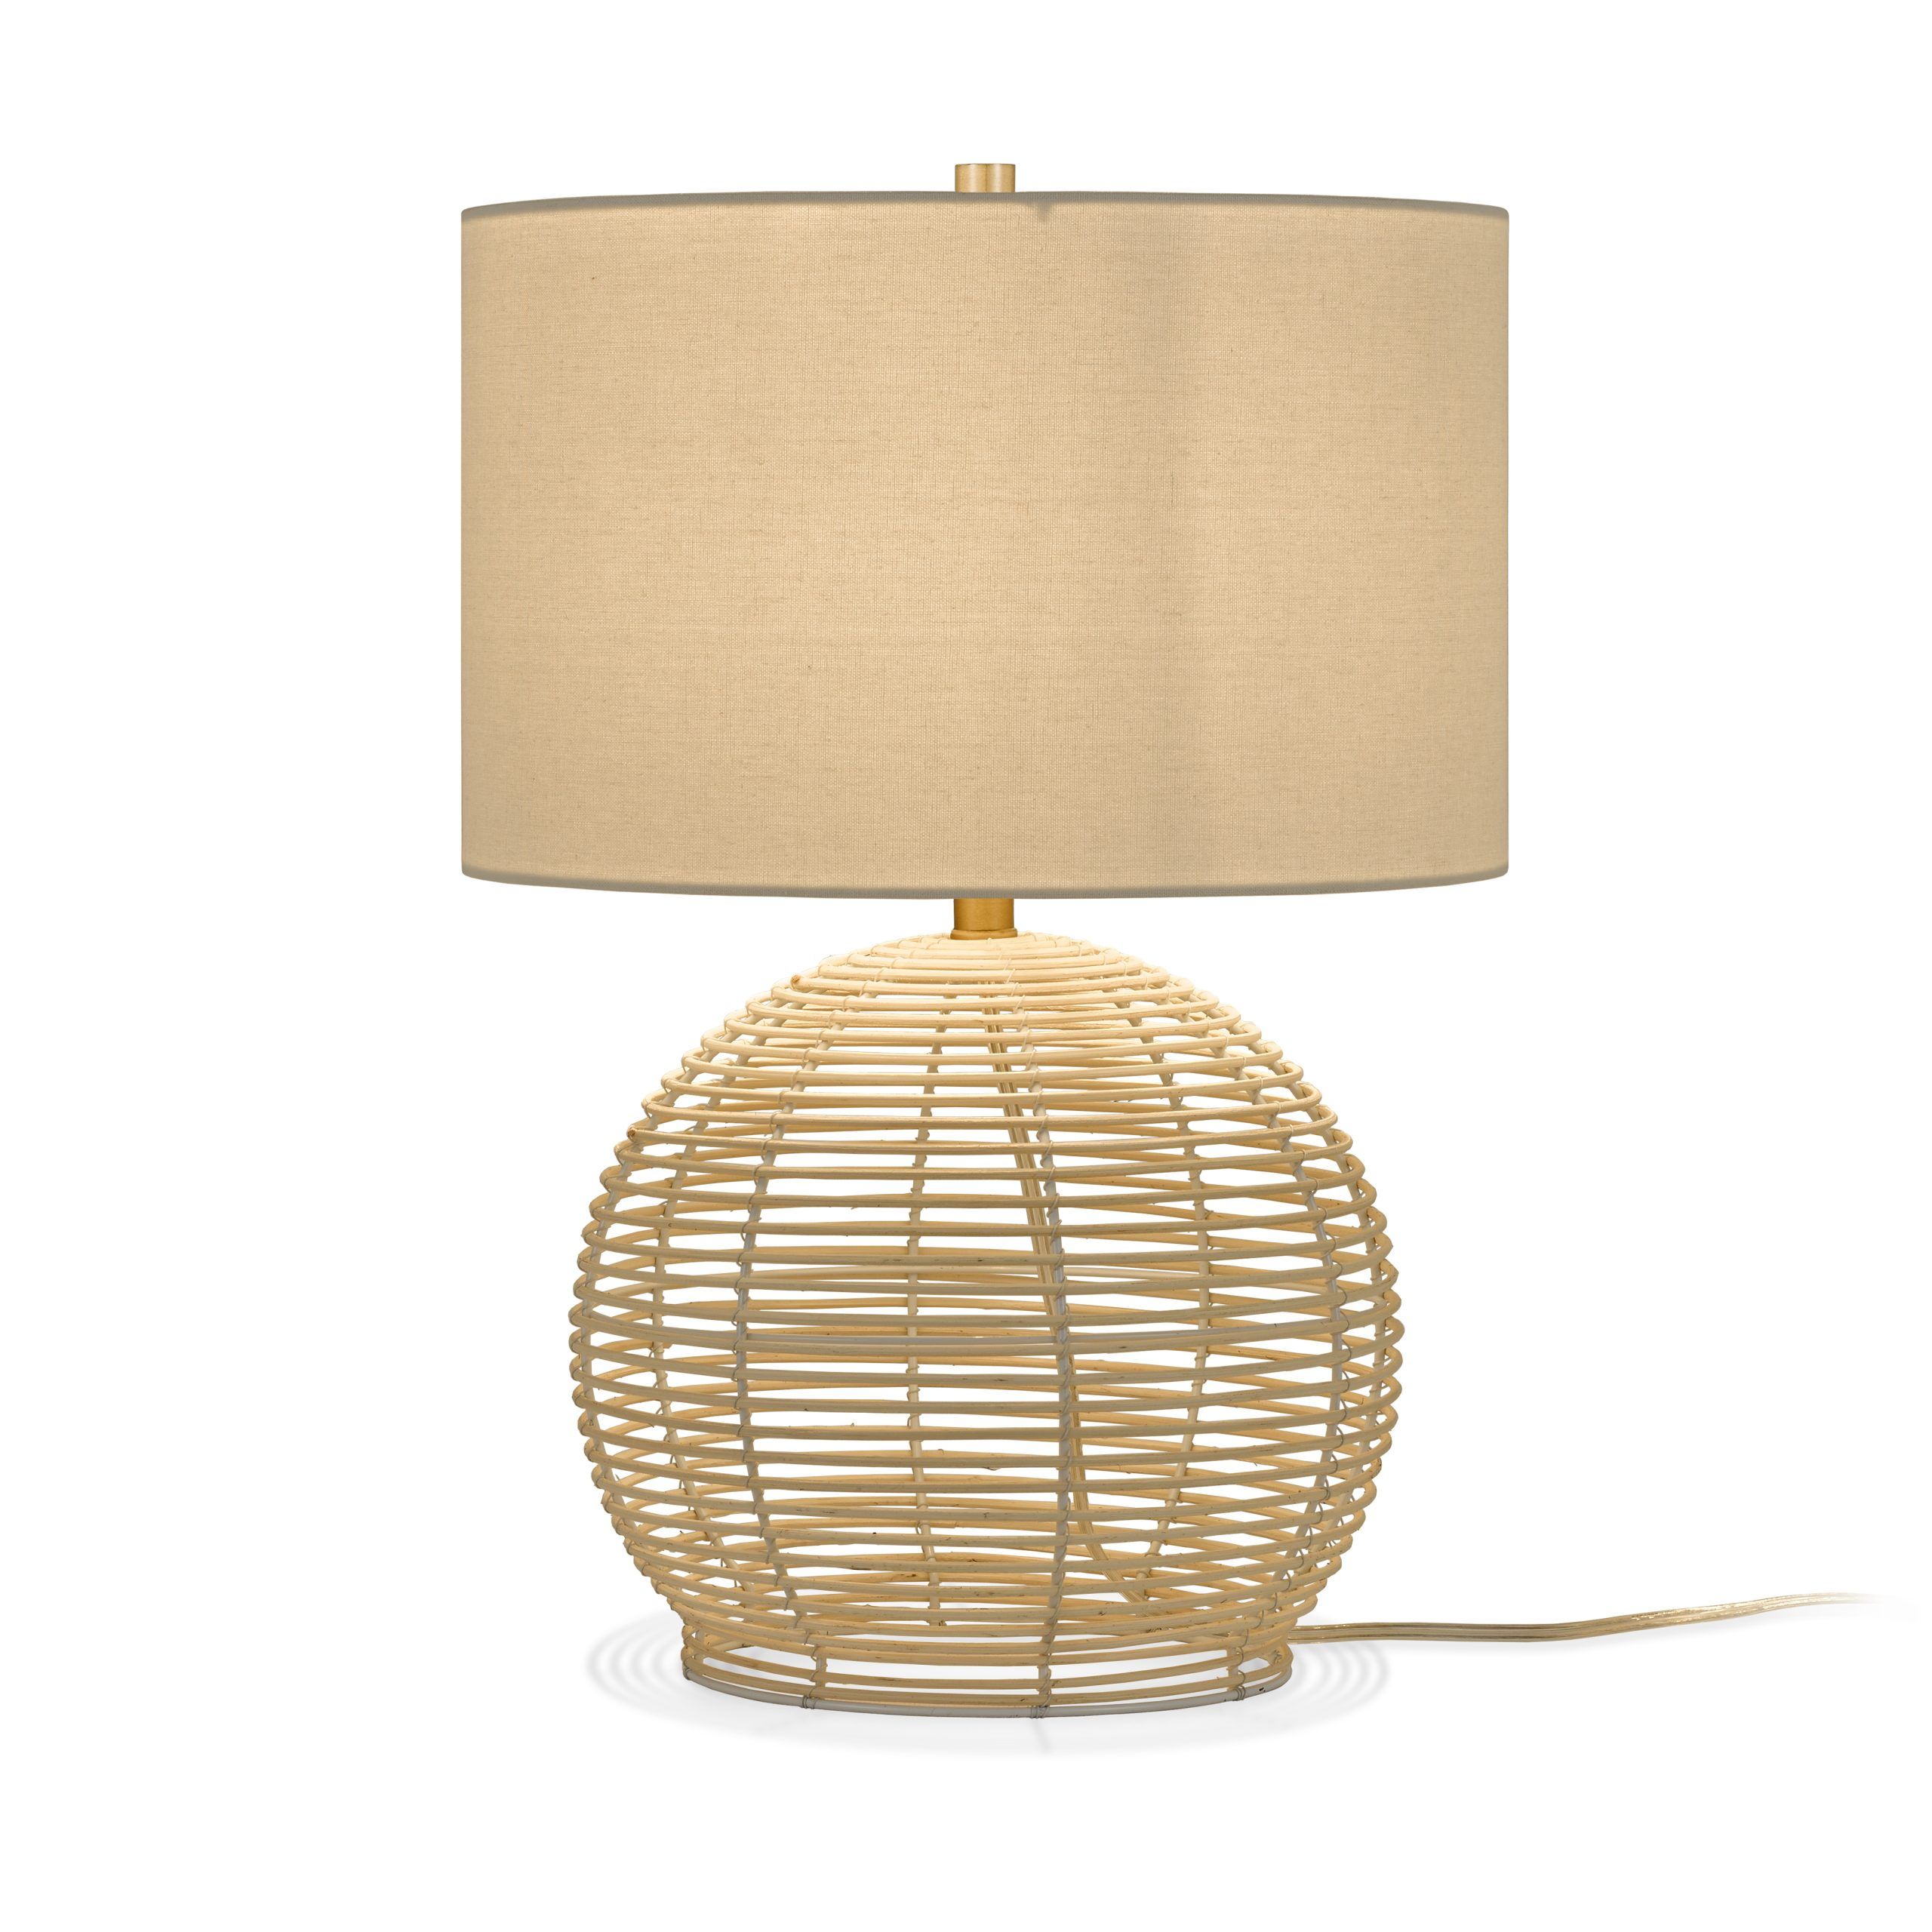 Woven Cane Standing Lamps With Regard To Favorite Woven Paths Coastal Rattan Bohemian Table Lamp – Walmart (View 9 of 10)